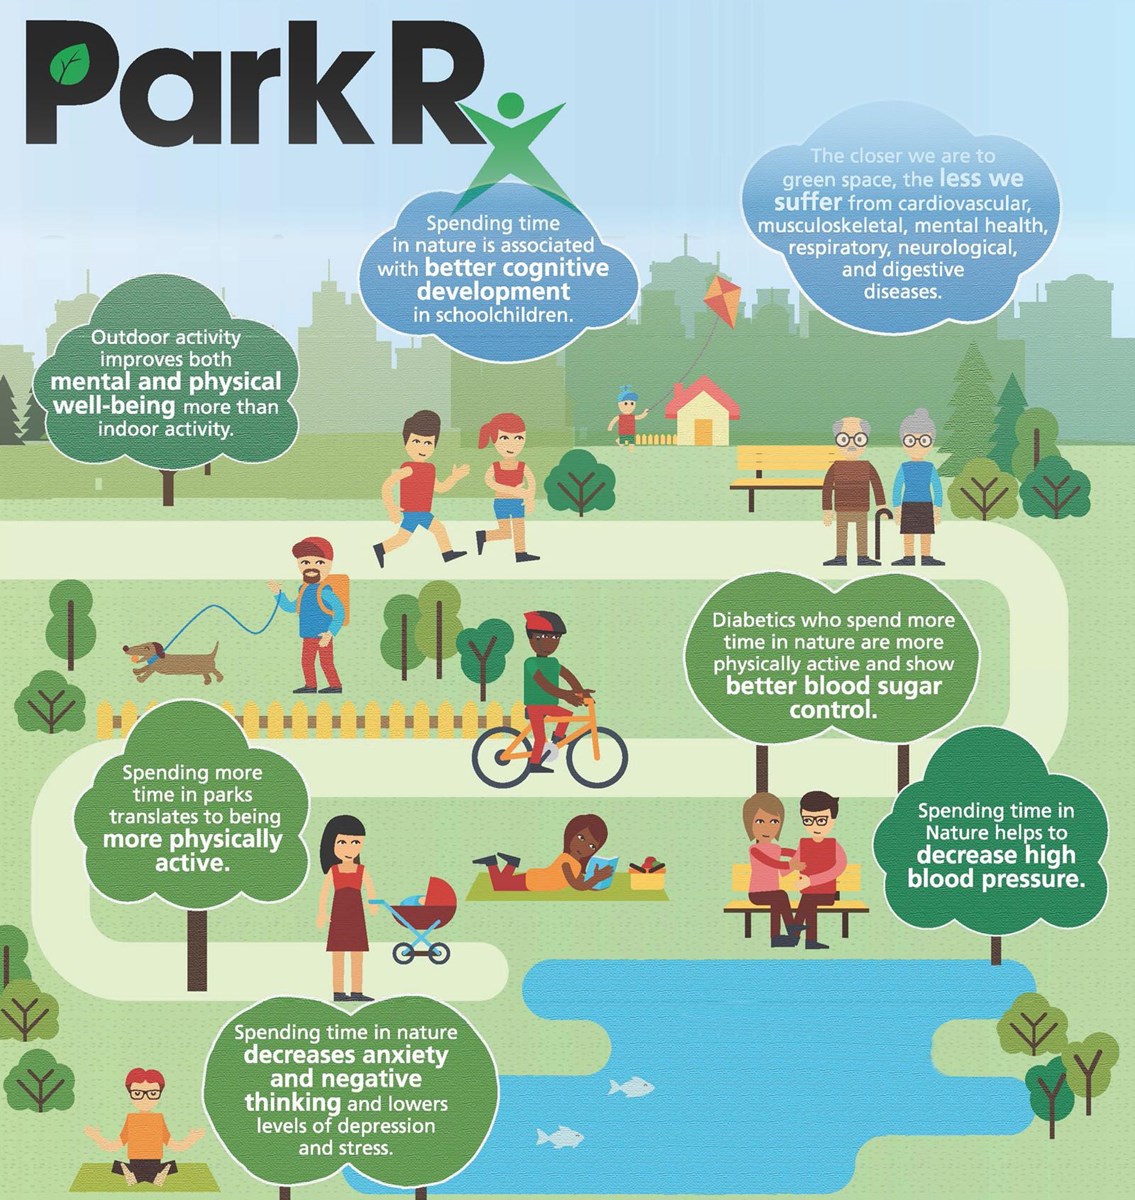 graphic of people enjoying recreation outdoors, Park Rx logo at top